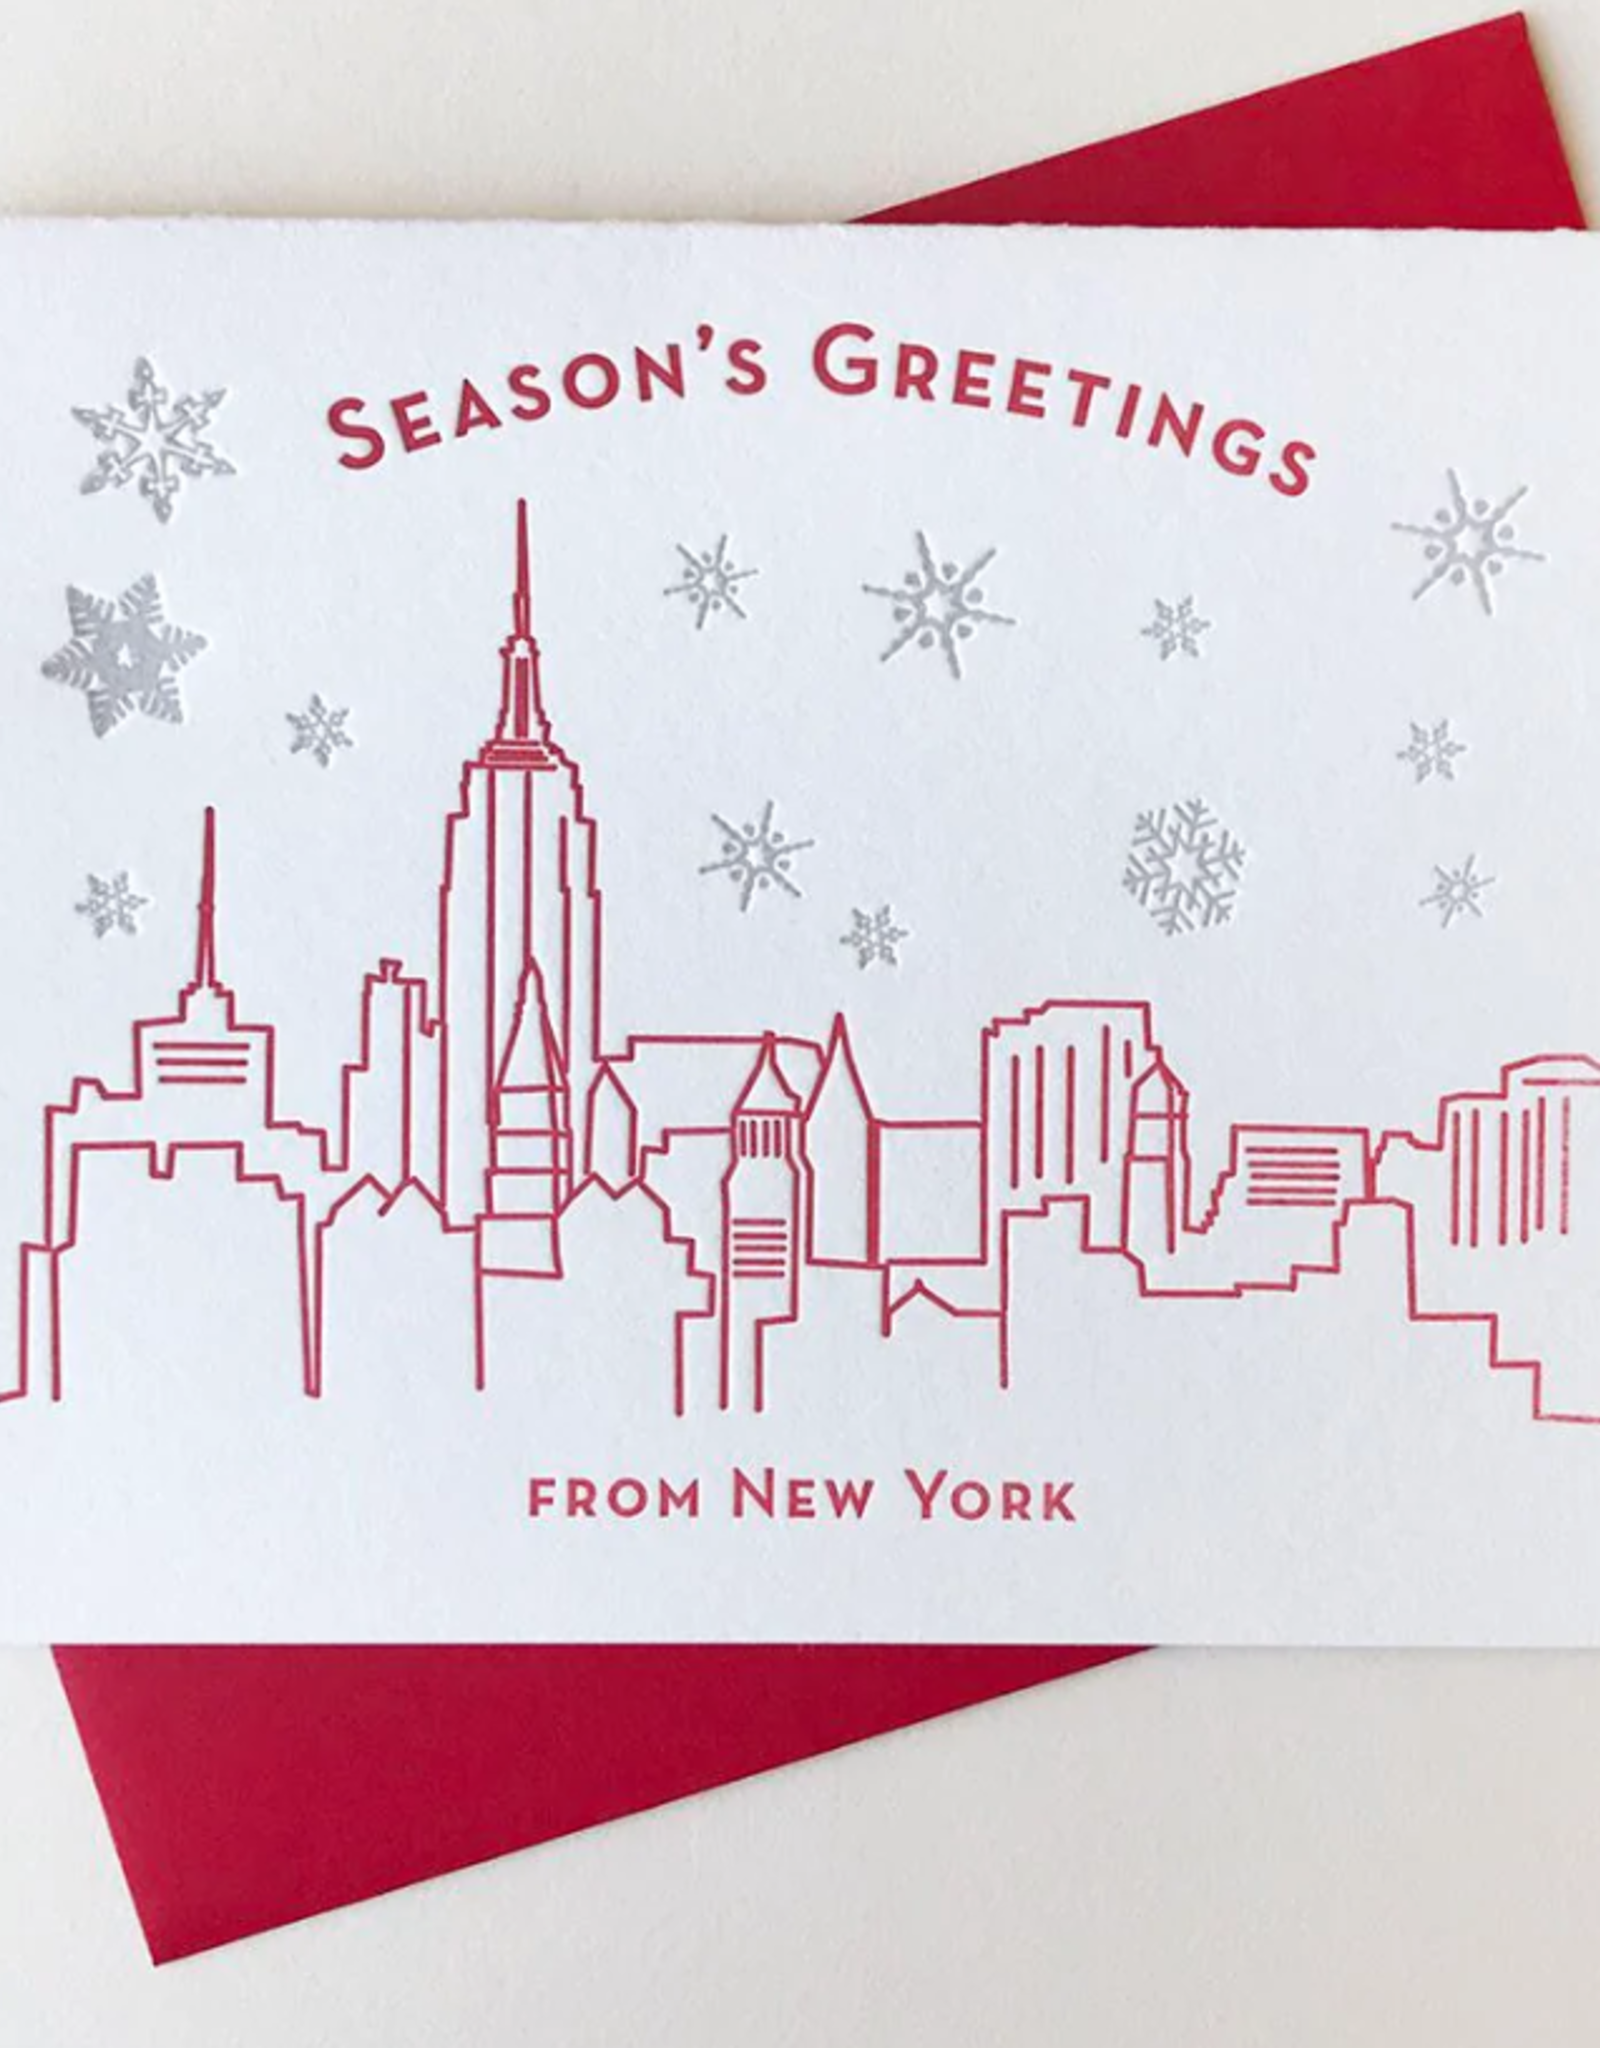 Steel Petal Press Boxed Holiday Cards - Season's Greetings From New York (6)